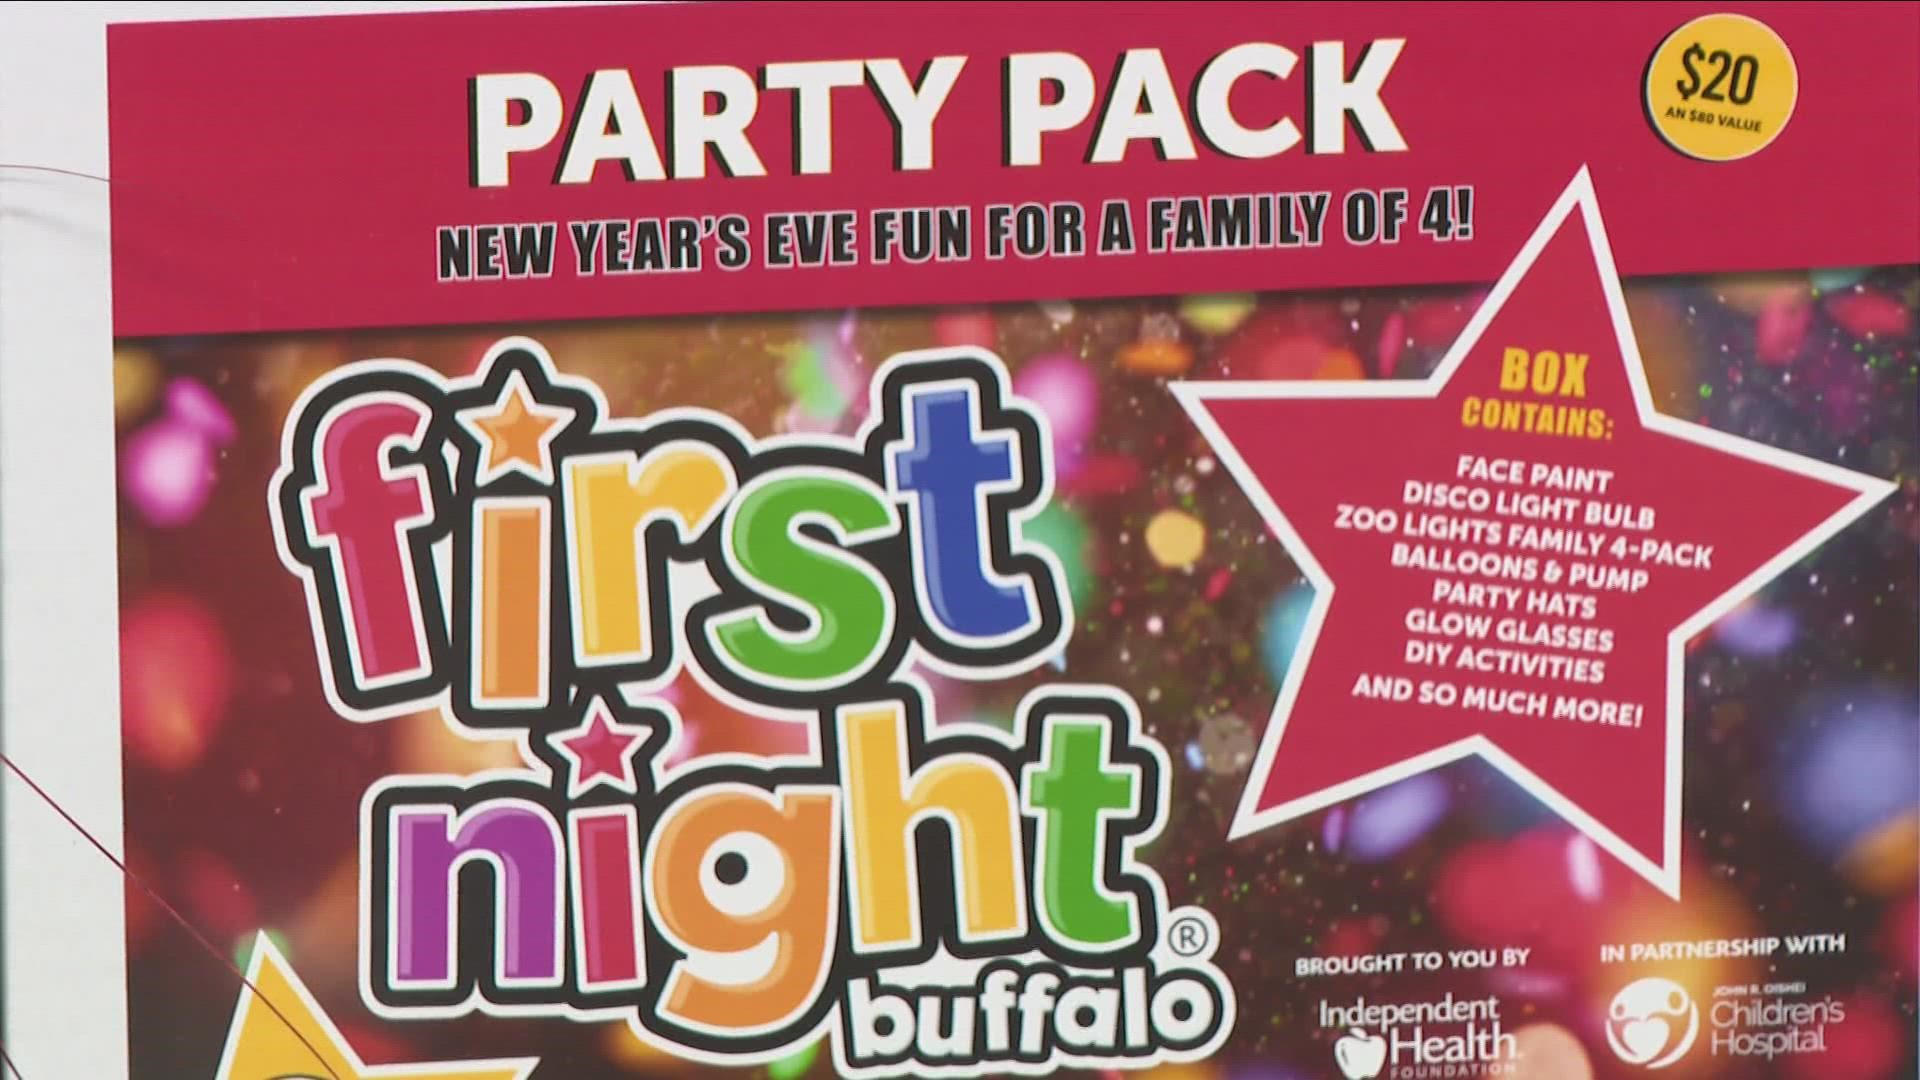 First Night party packs for sale $20 at Tops Markets